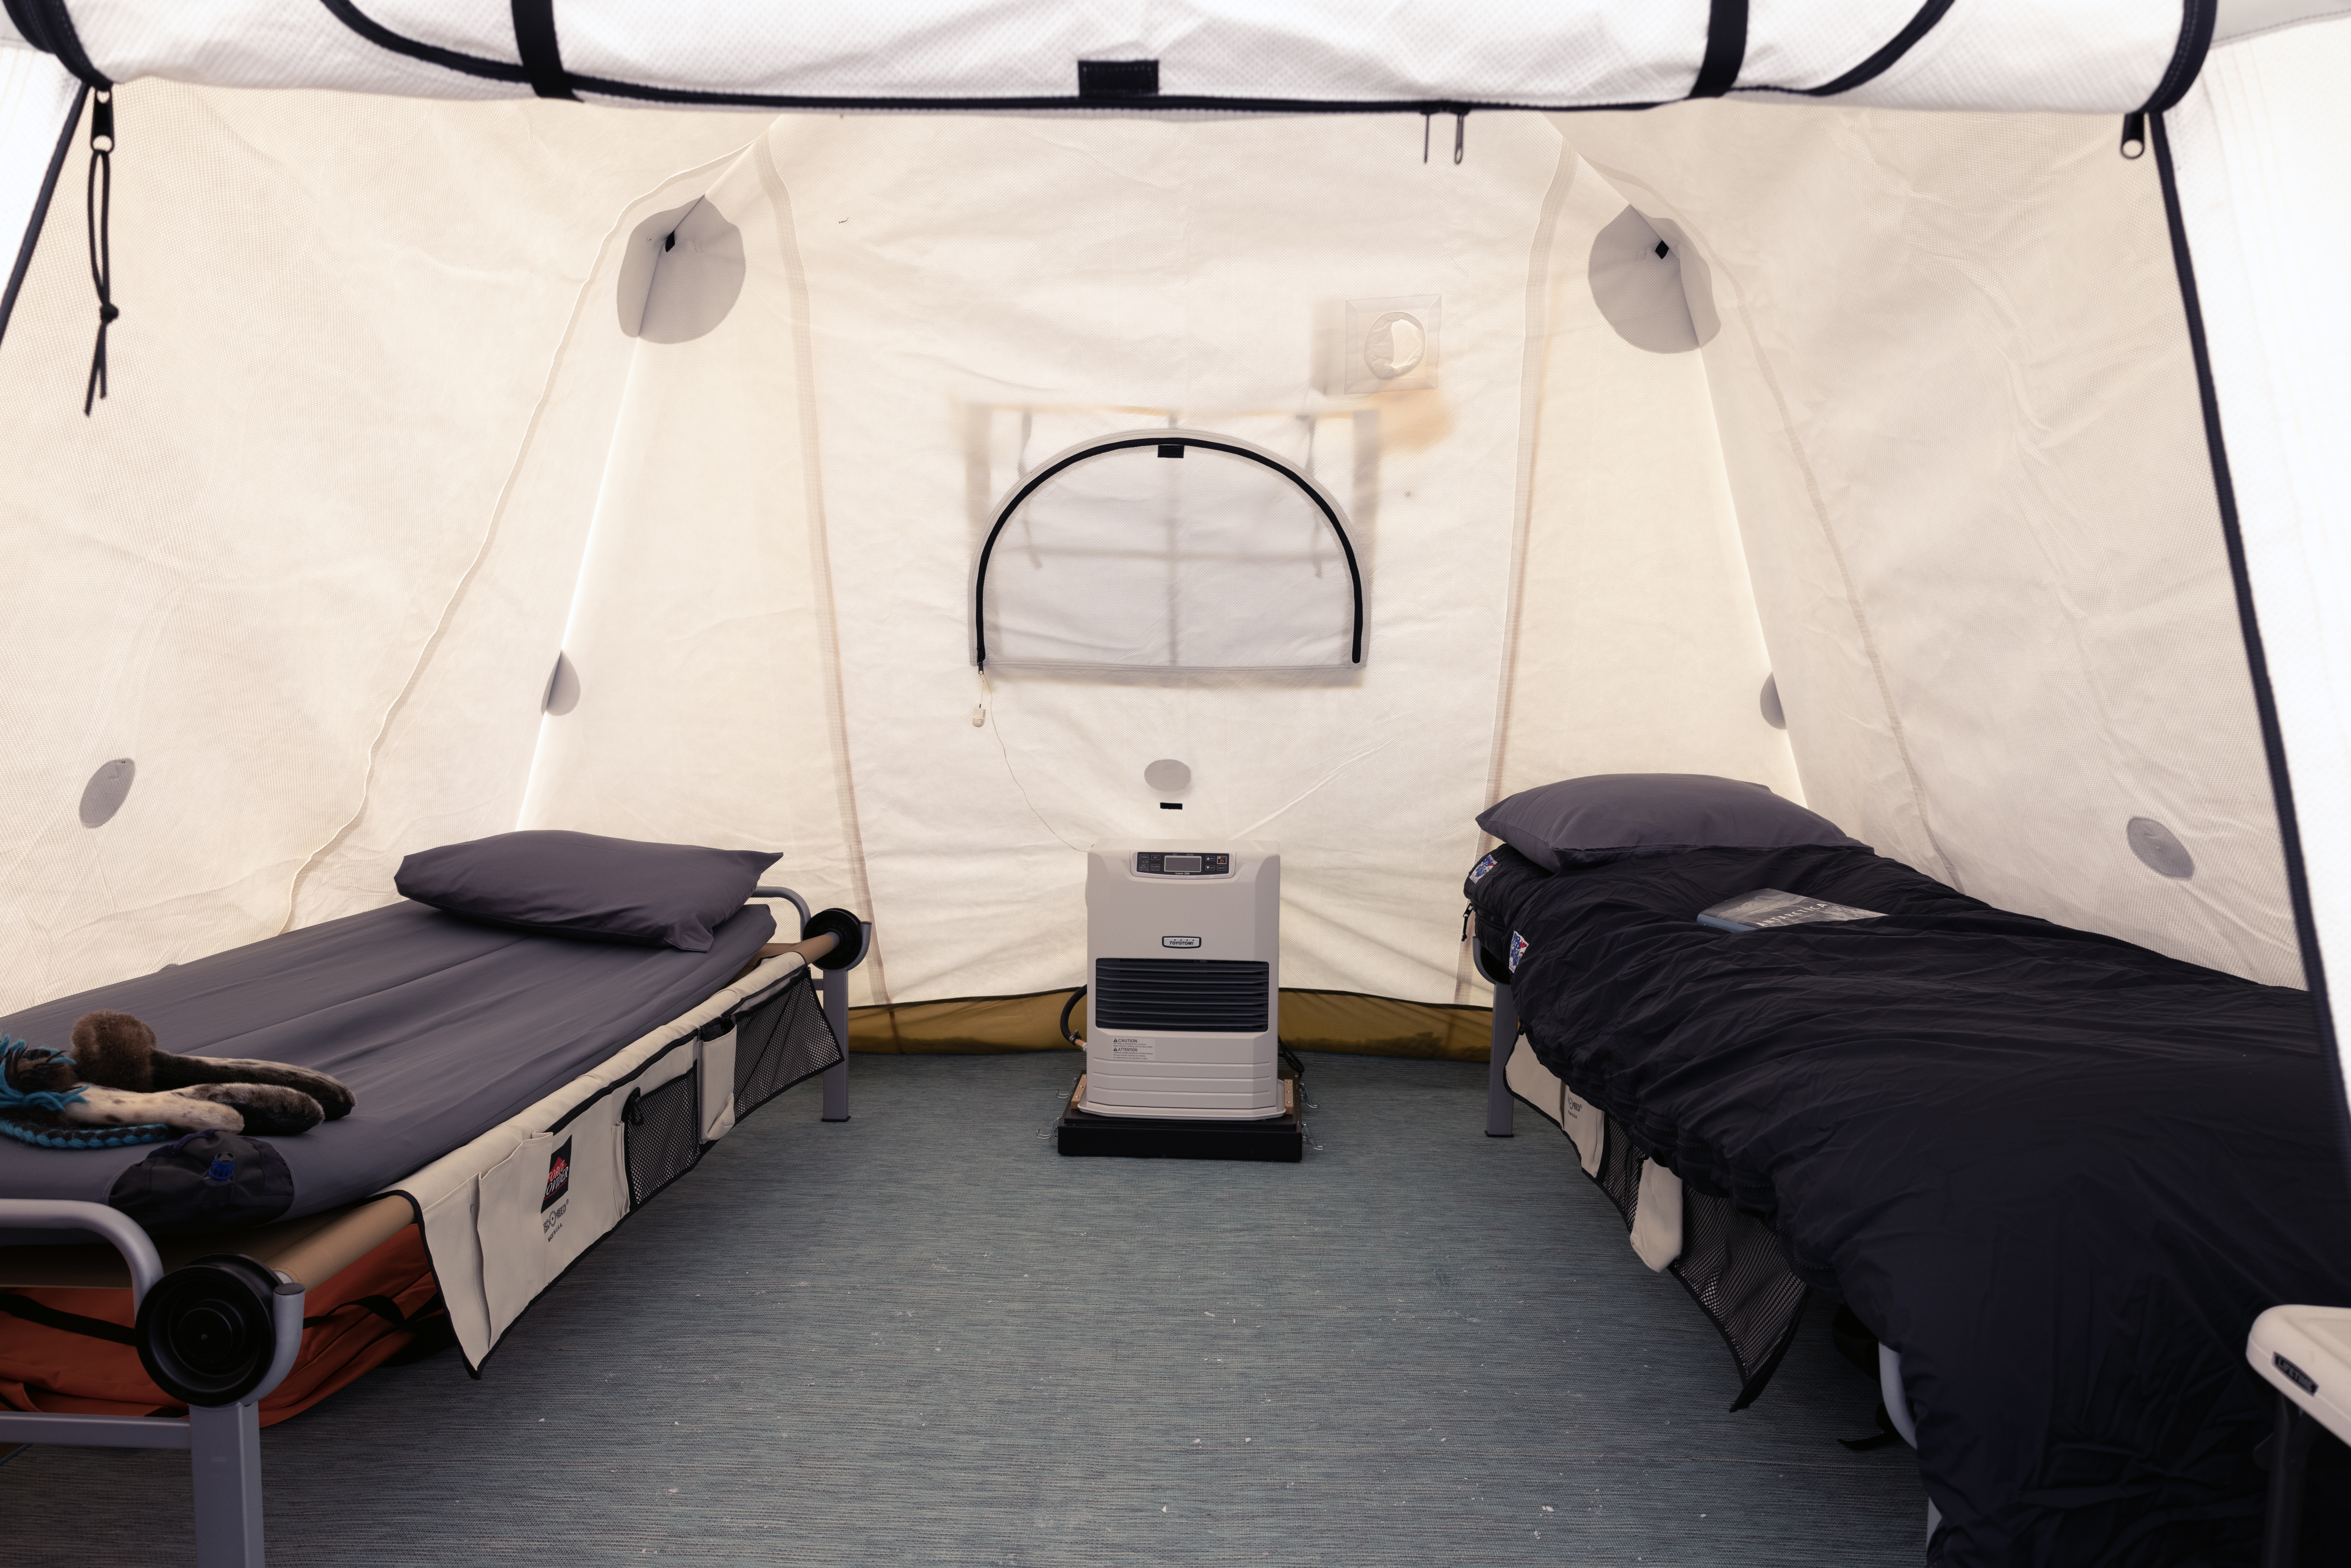 Each guest tent has two cots a table and heater